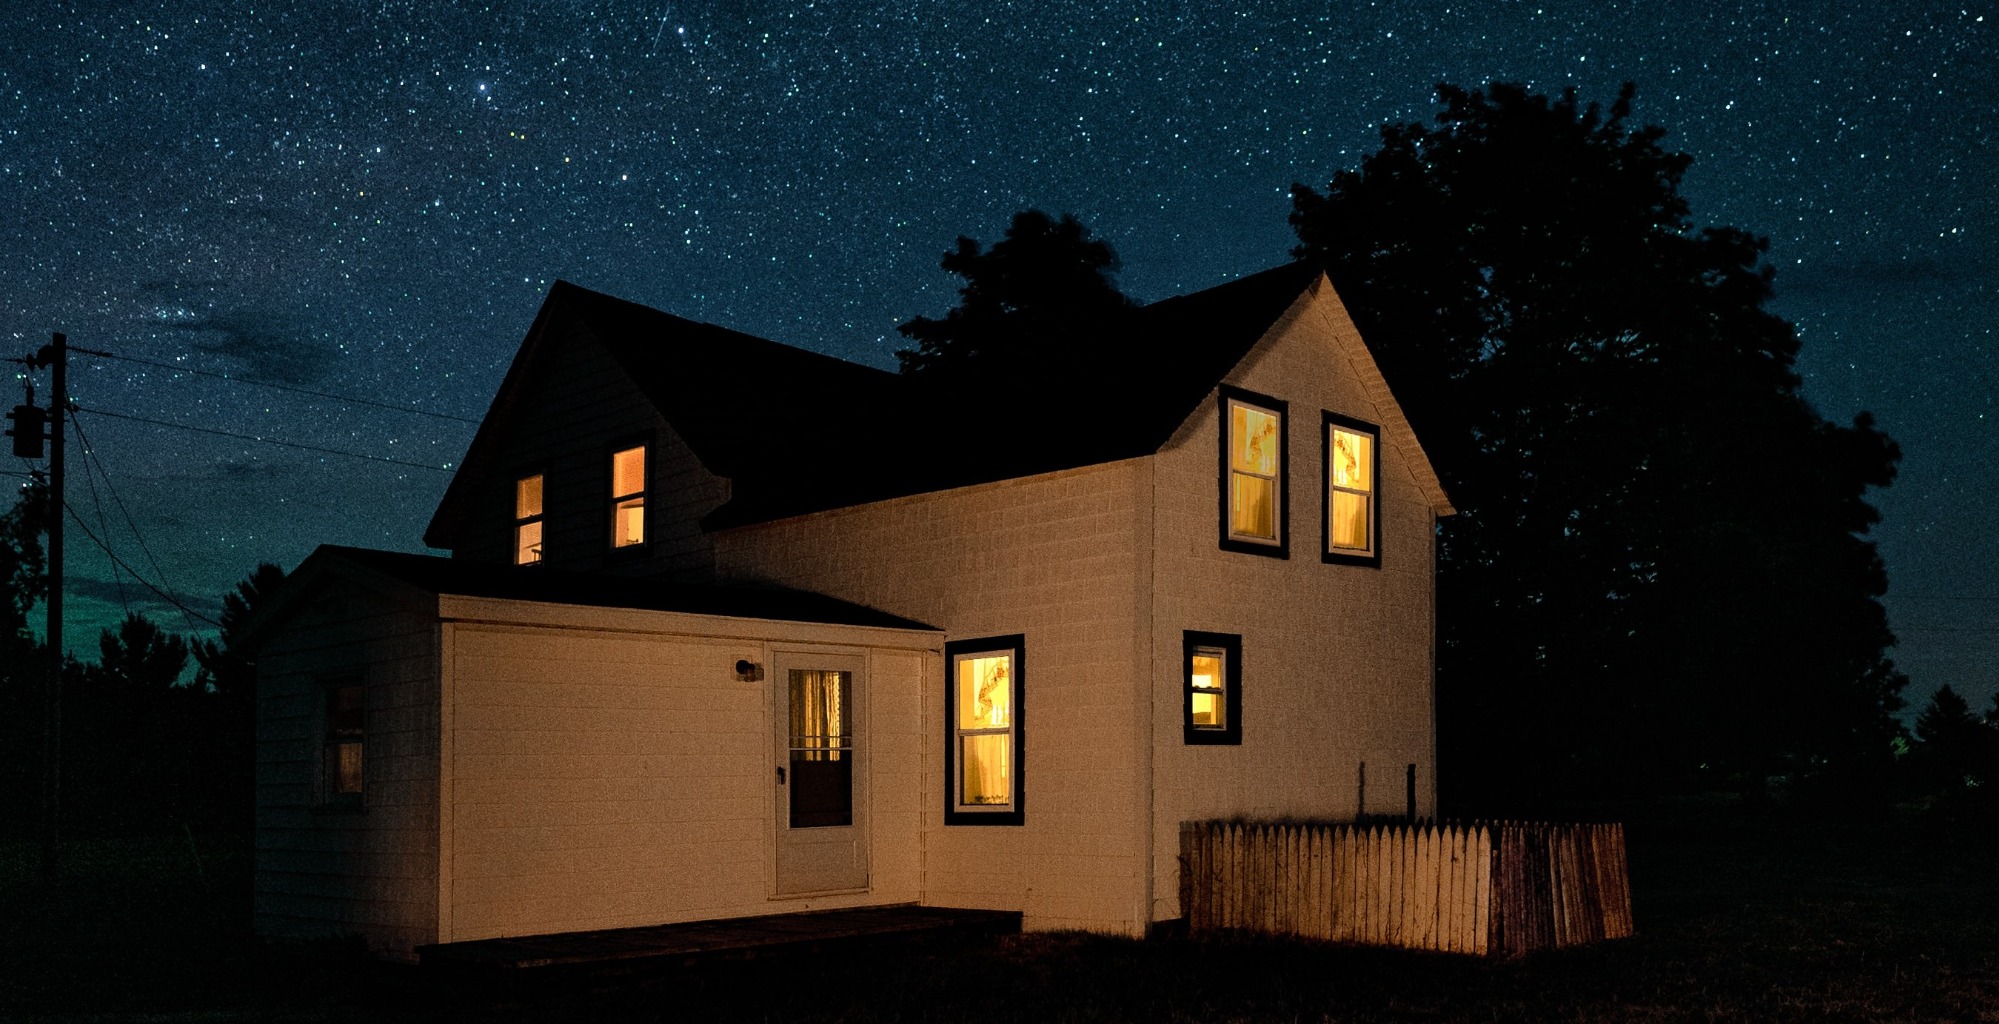 Goenerge solar generator can provide home backup power on blackout nights.